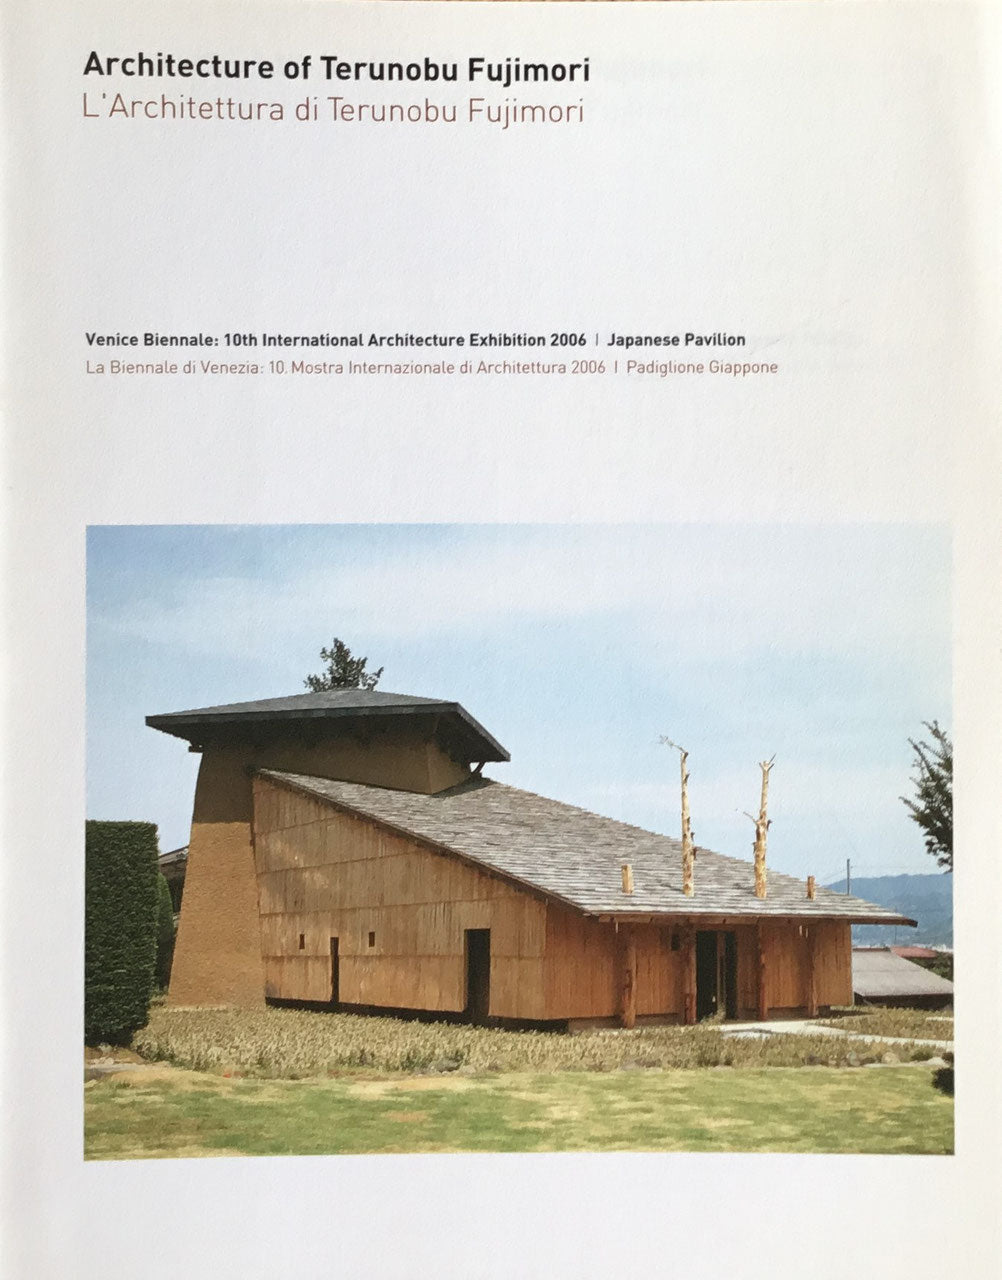 Architecture of Terunobu Fujimori and ROJO : Unknown Japanese Architecture and Cities 藤森建築と路上観察：誰も知らない日本の建築と都市